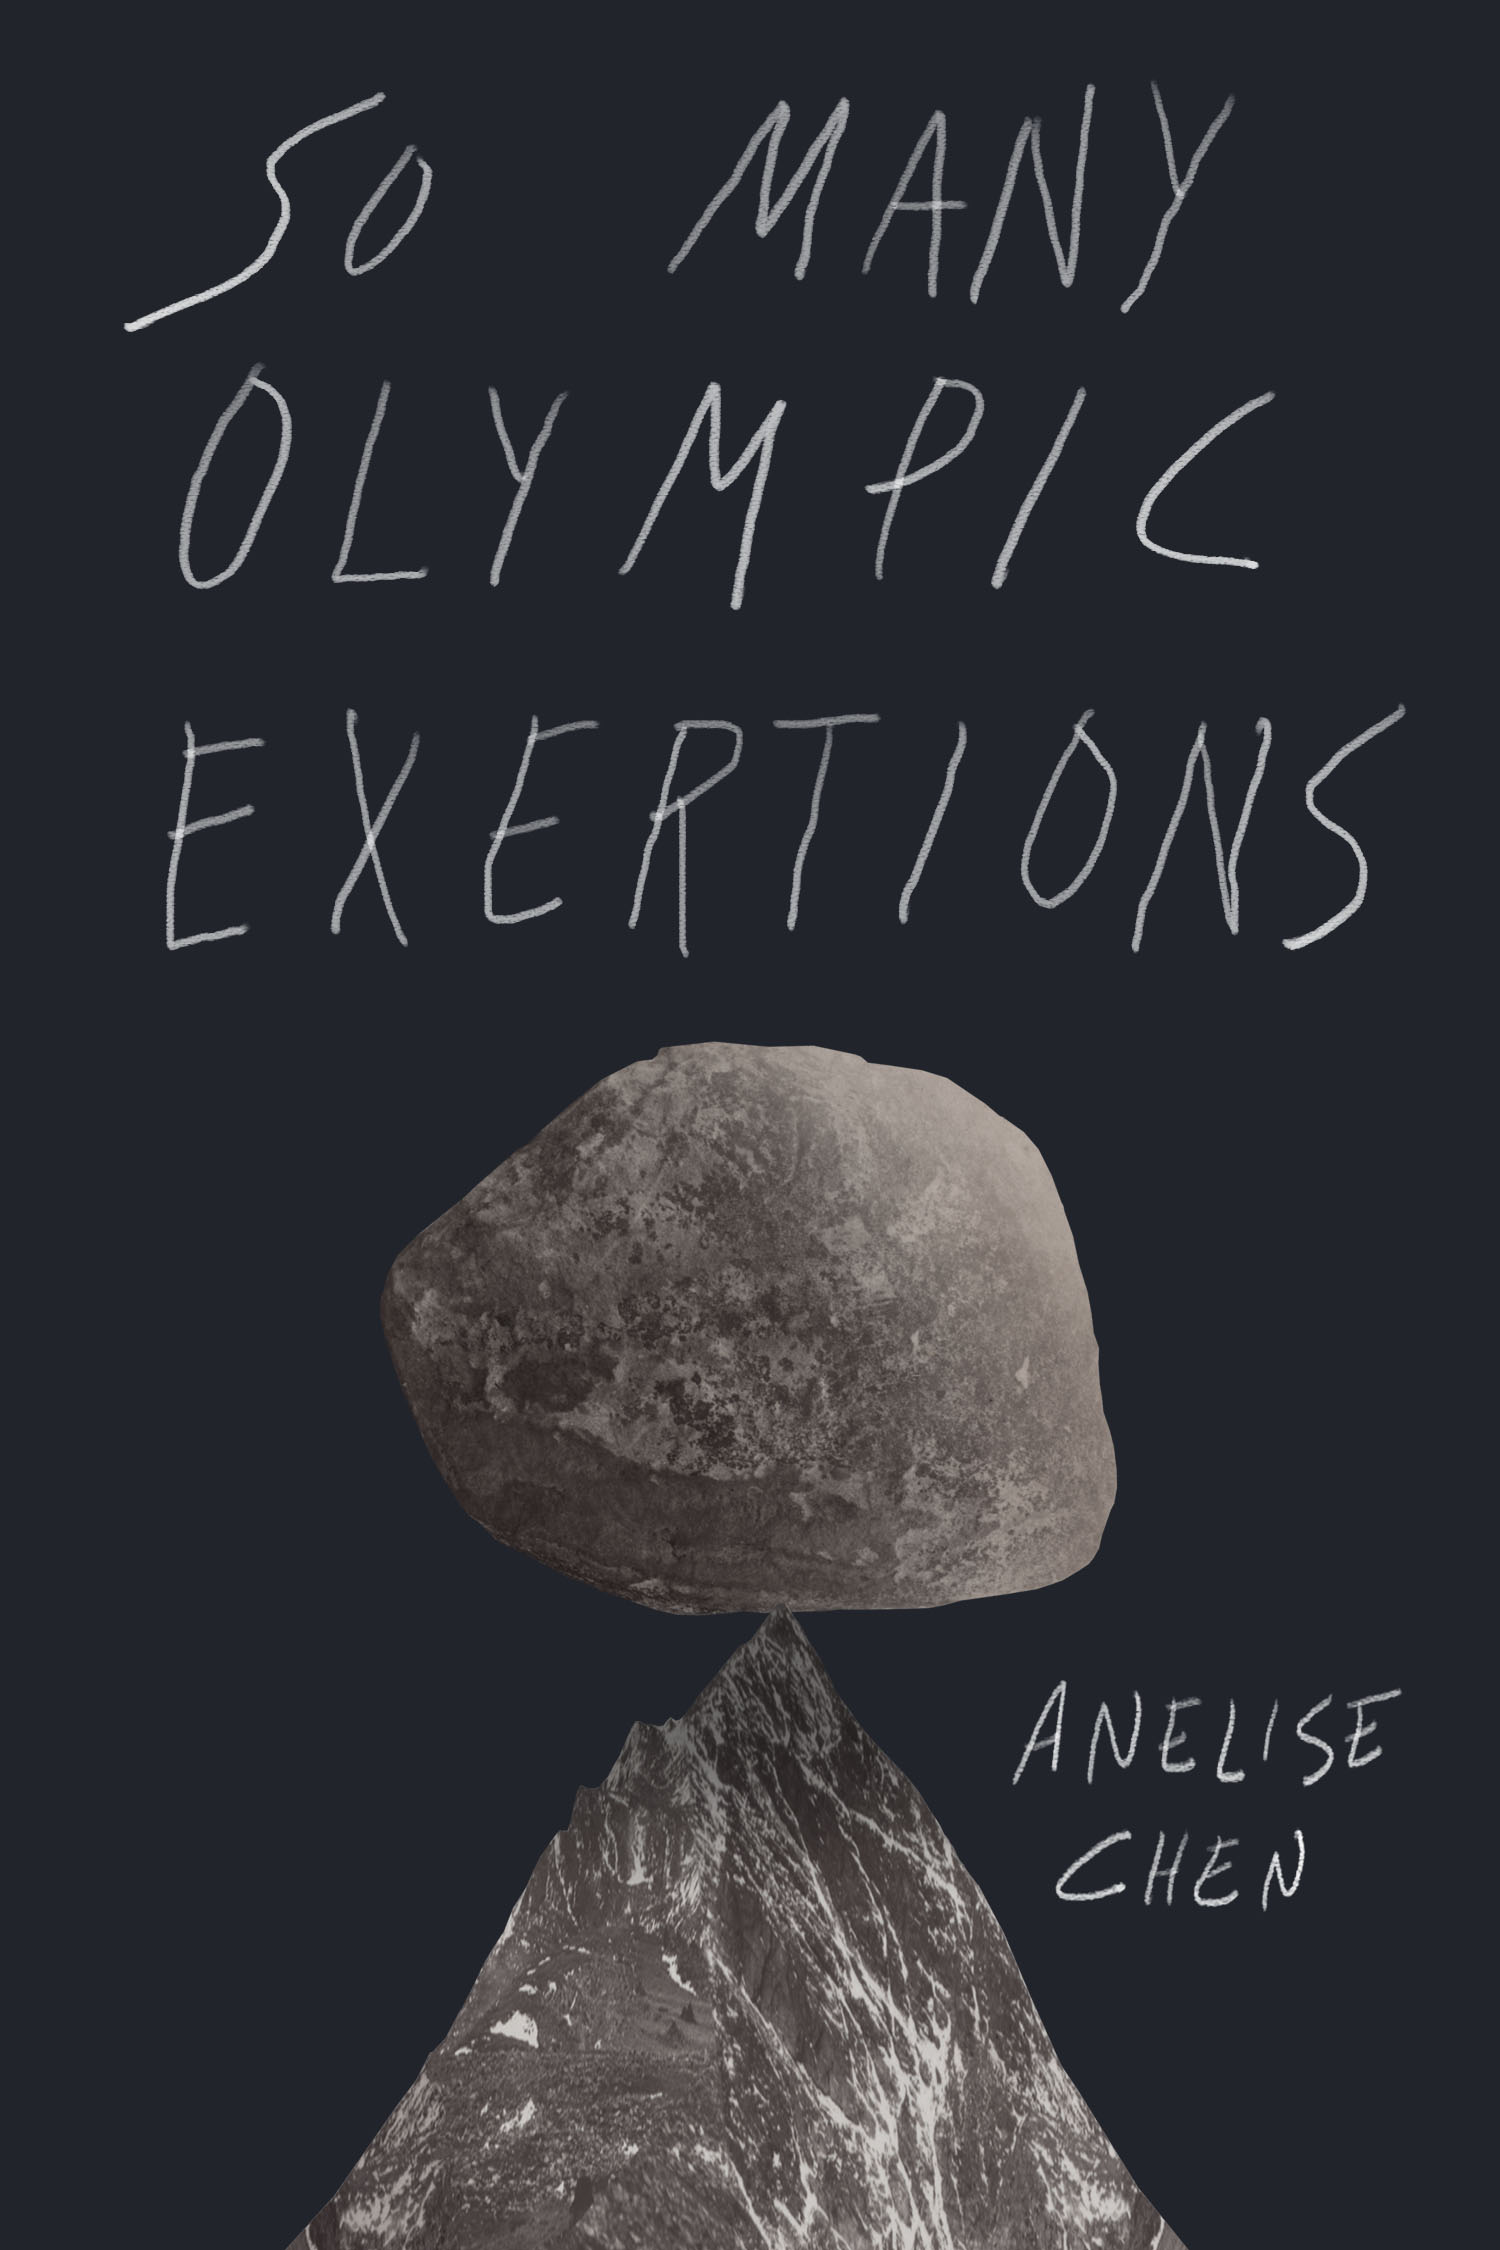 Book Launch: So Many Olympic Exertions by Anelise Chen — Featuring Readings by Leanne Shapton & Katie Kitamura